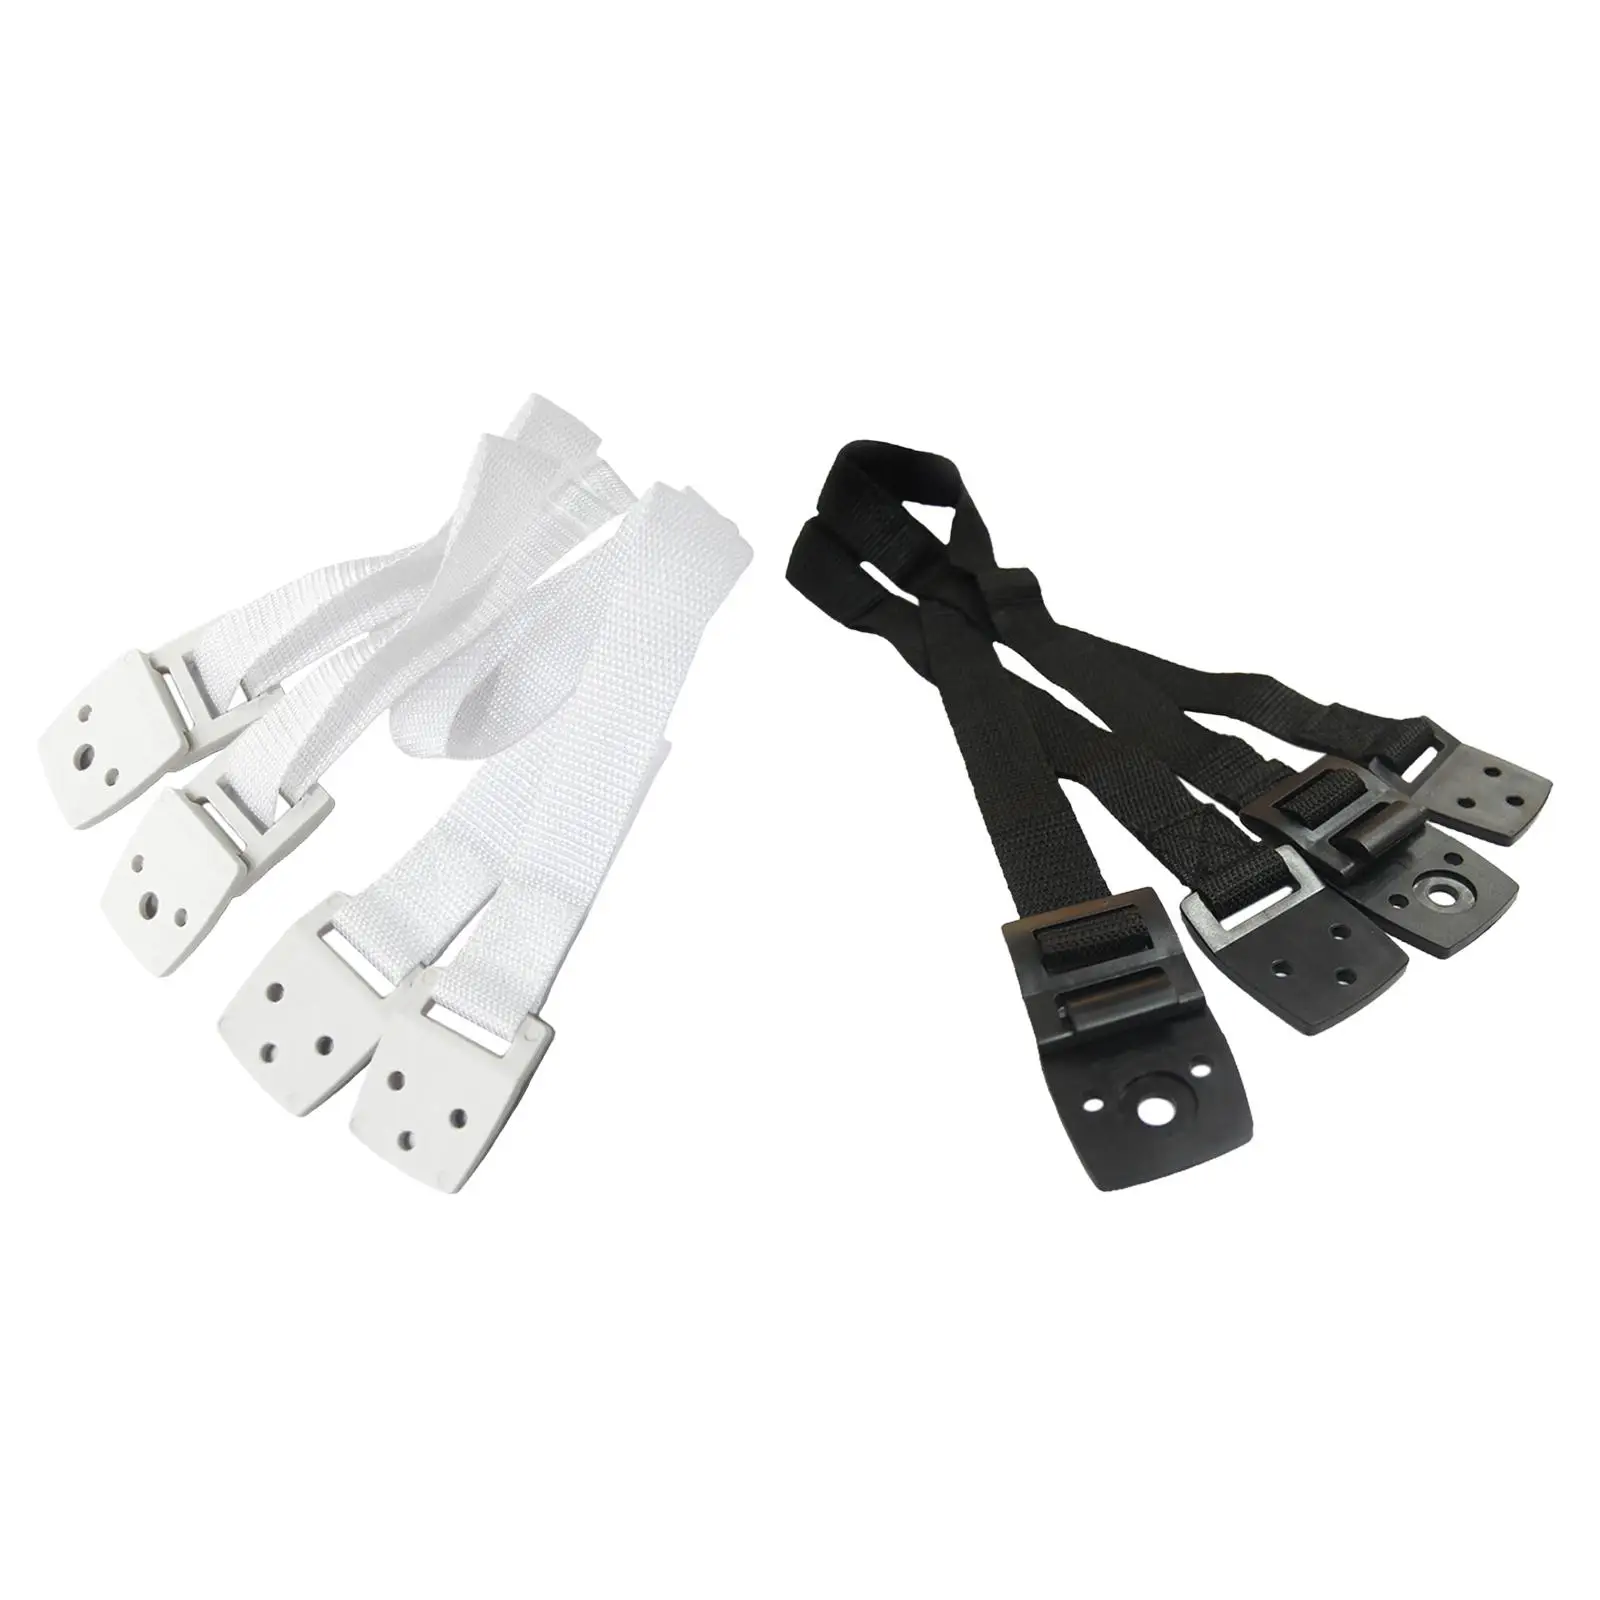 TV Anti Tip Straps Resistant Straps Non Tipping Safety Strap for Shelves Flat Screen Bookcase Baby Safety Protection